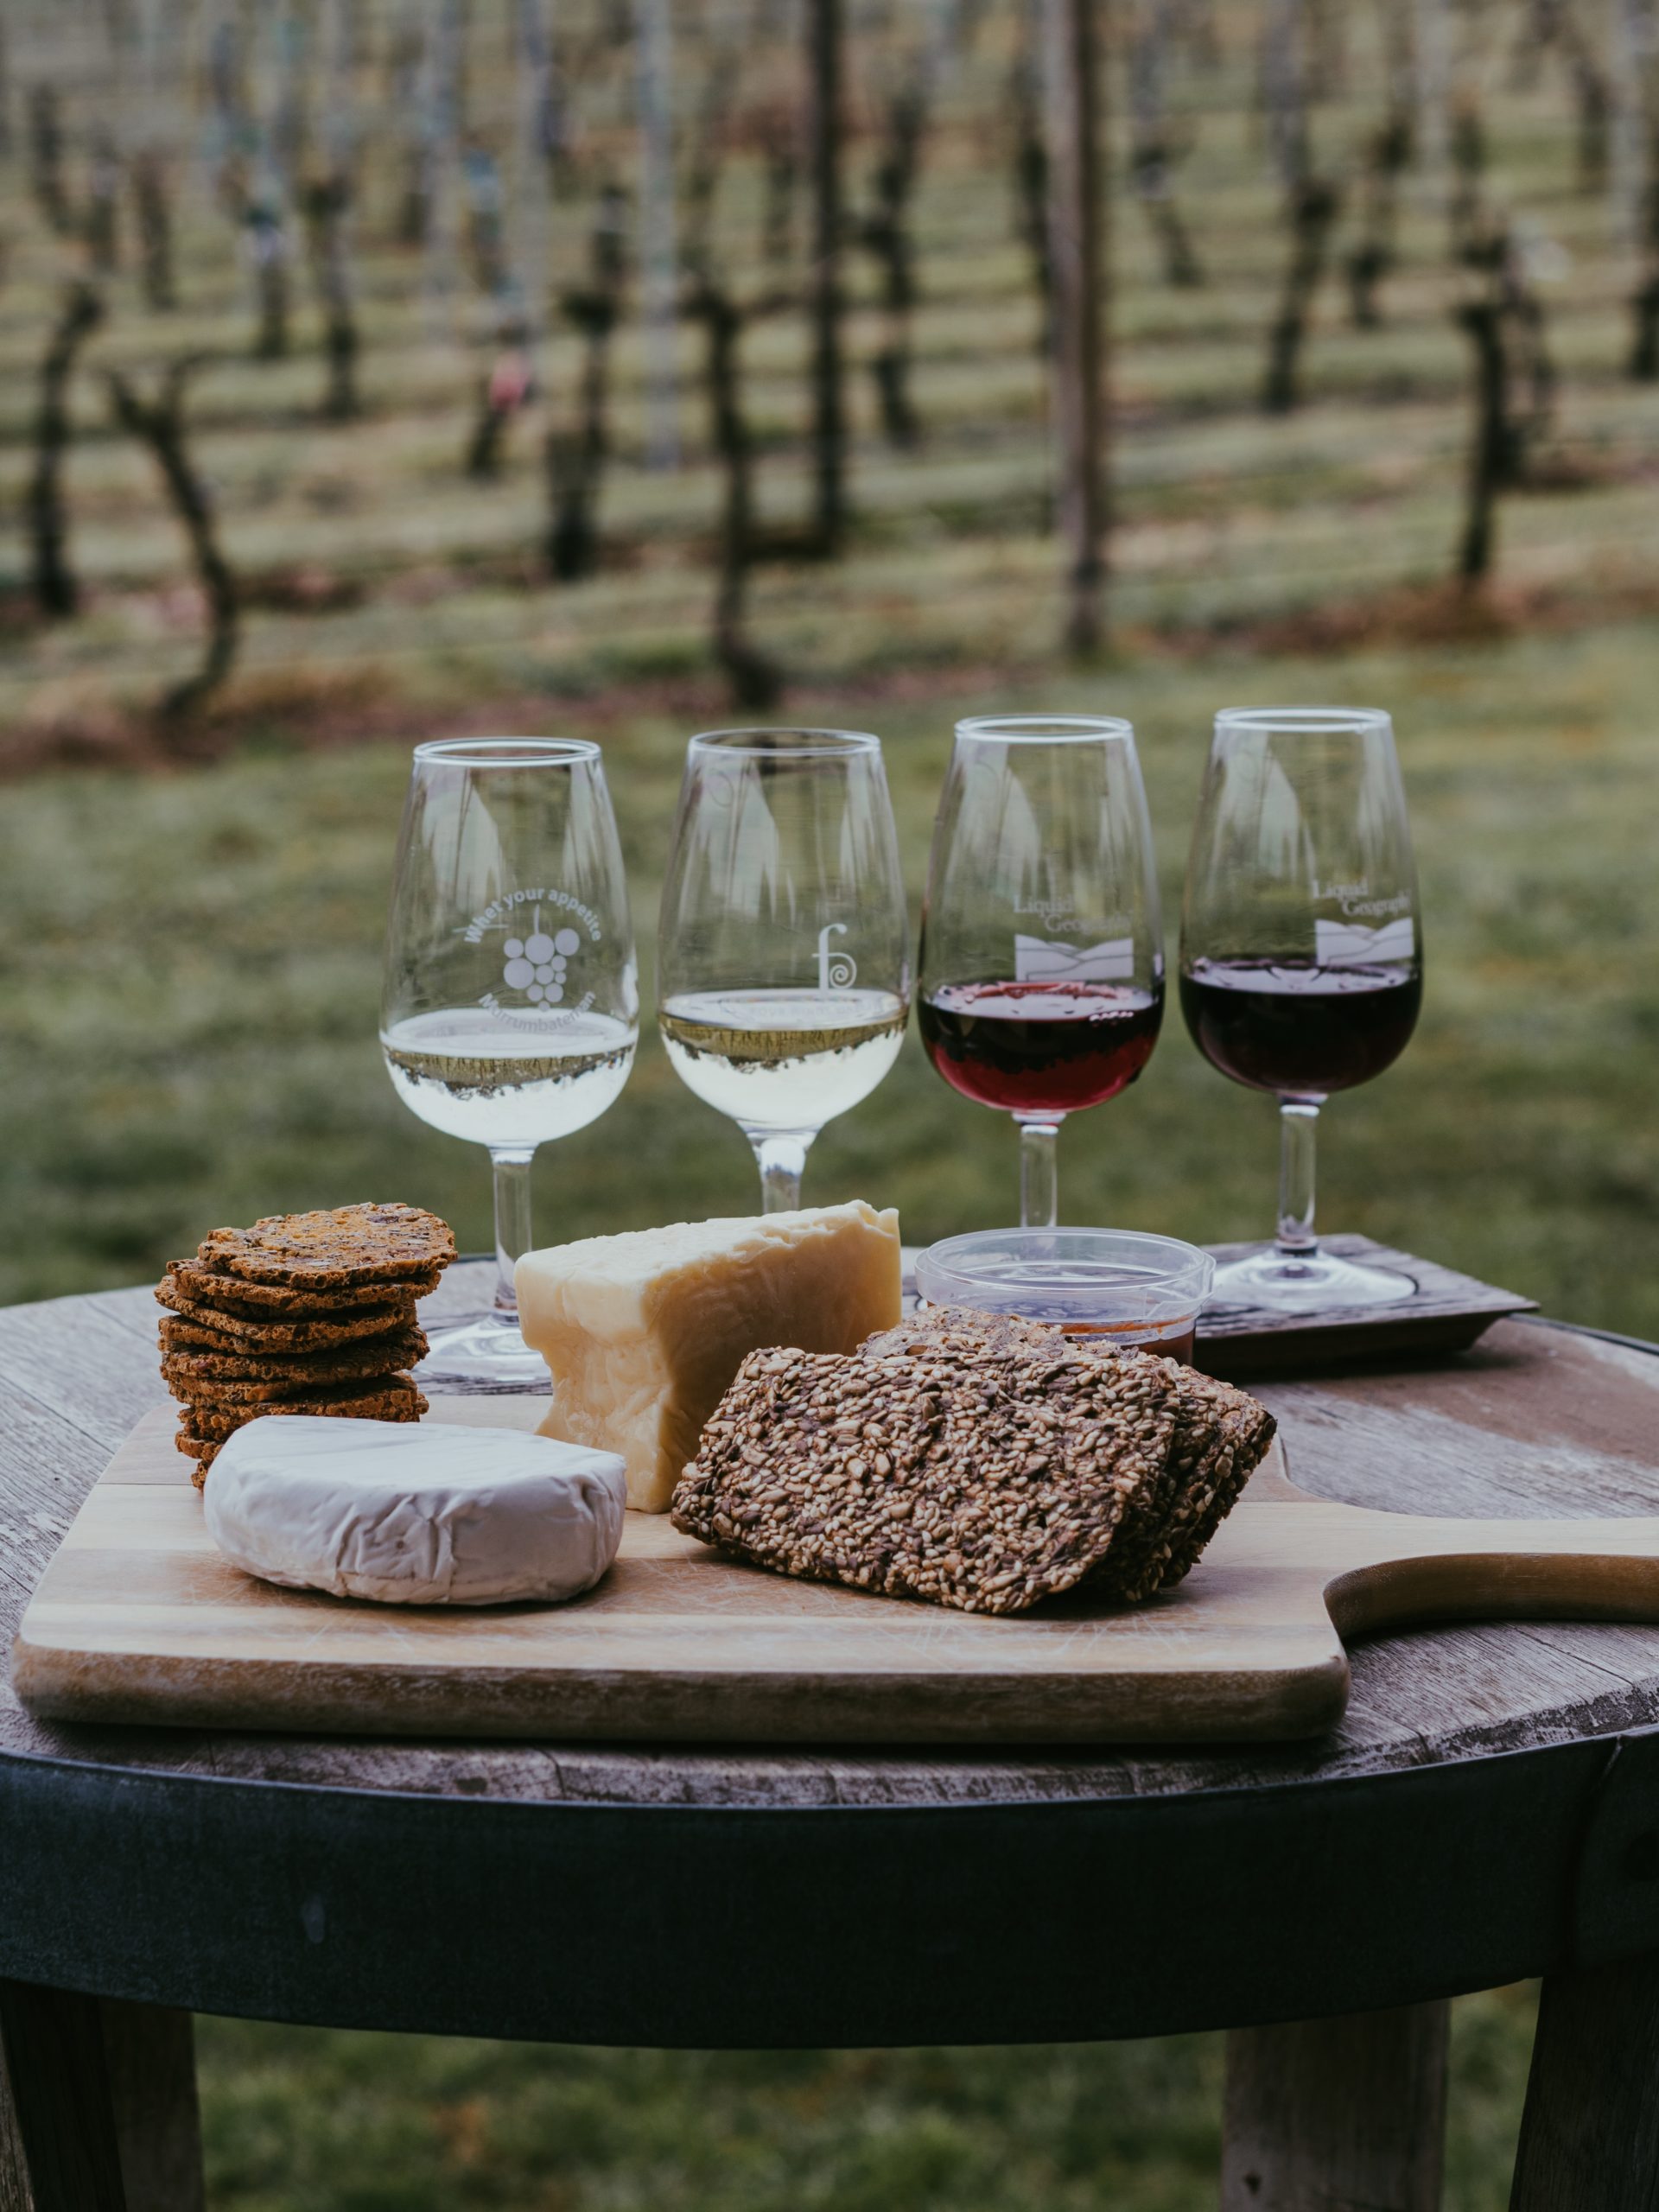 A selection of wines and cheeses on a rustic table.